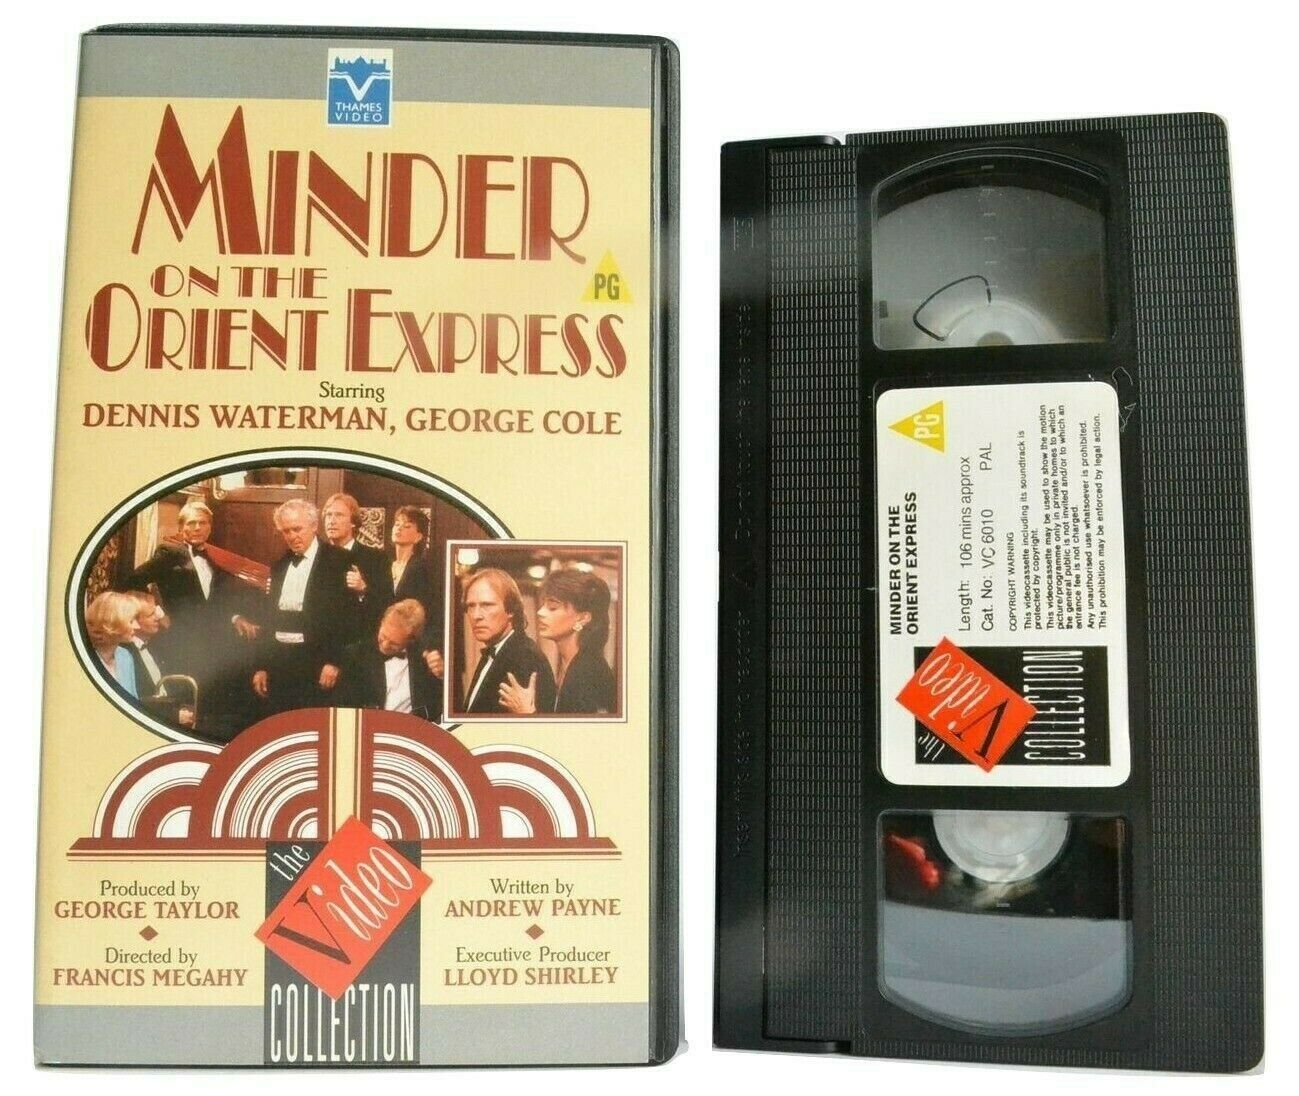 Minder Of The Orient Express [Thames Video] T.V. Series - Dennis Waterman - VHS-